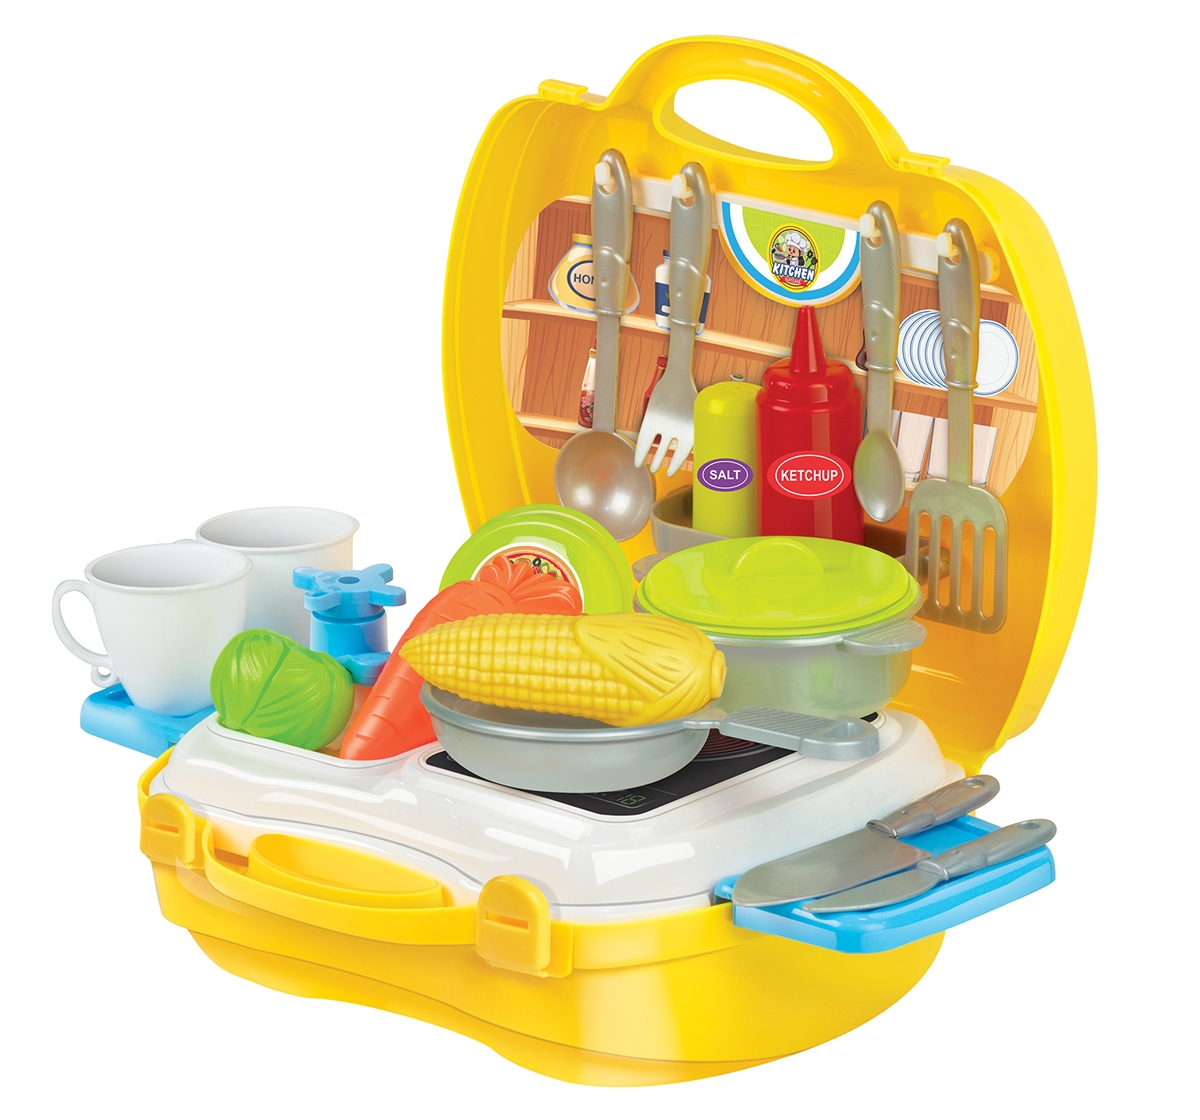 Kingdom Of Play | Kingdom Of Play Luxury Kitchen set cooking toy with suitcase and kitchen accessories Multicolor 24M+